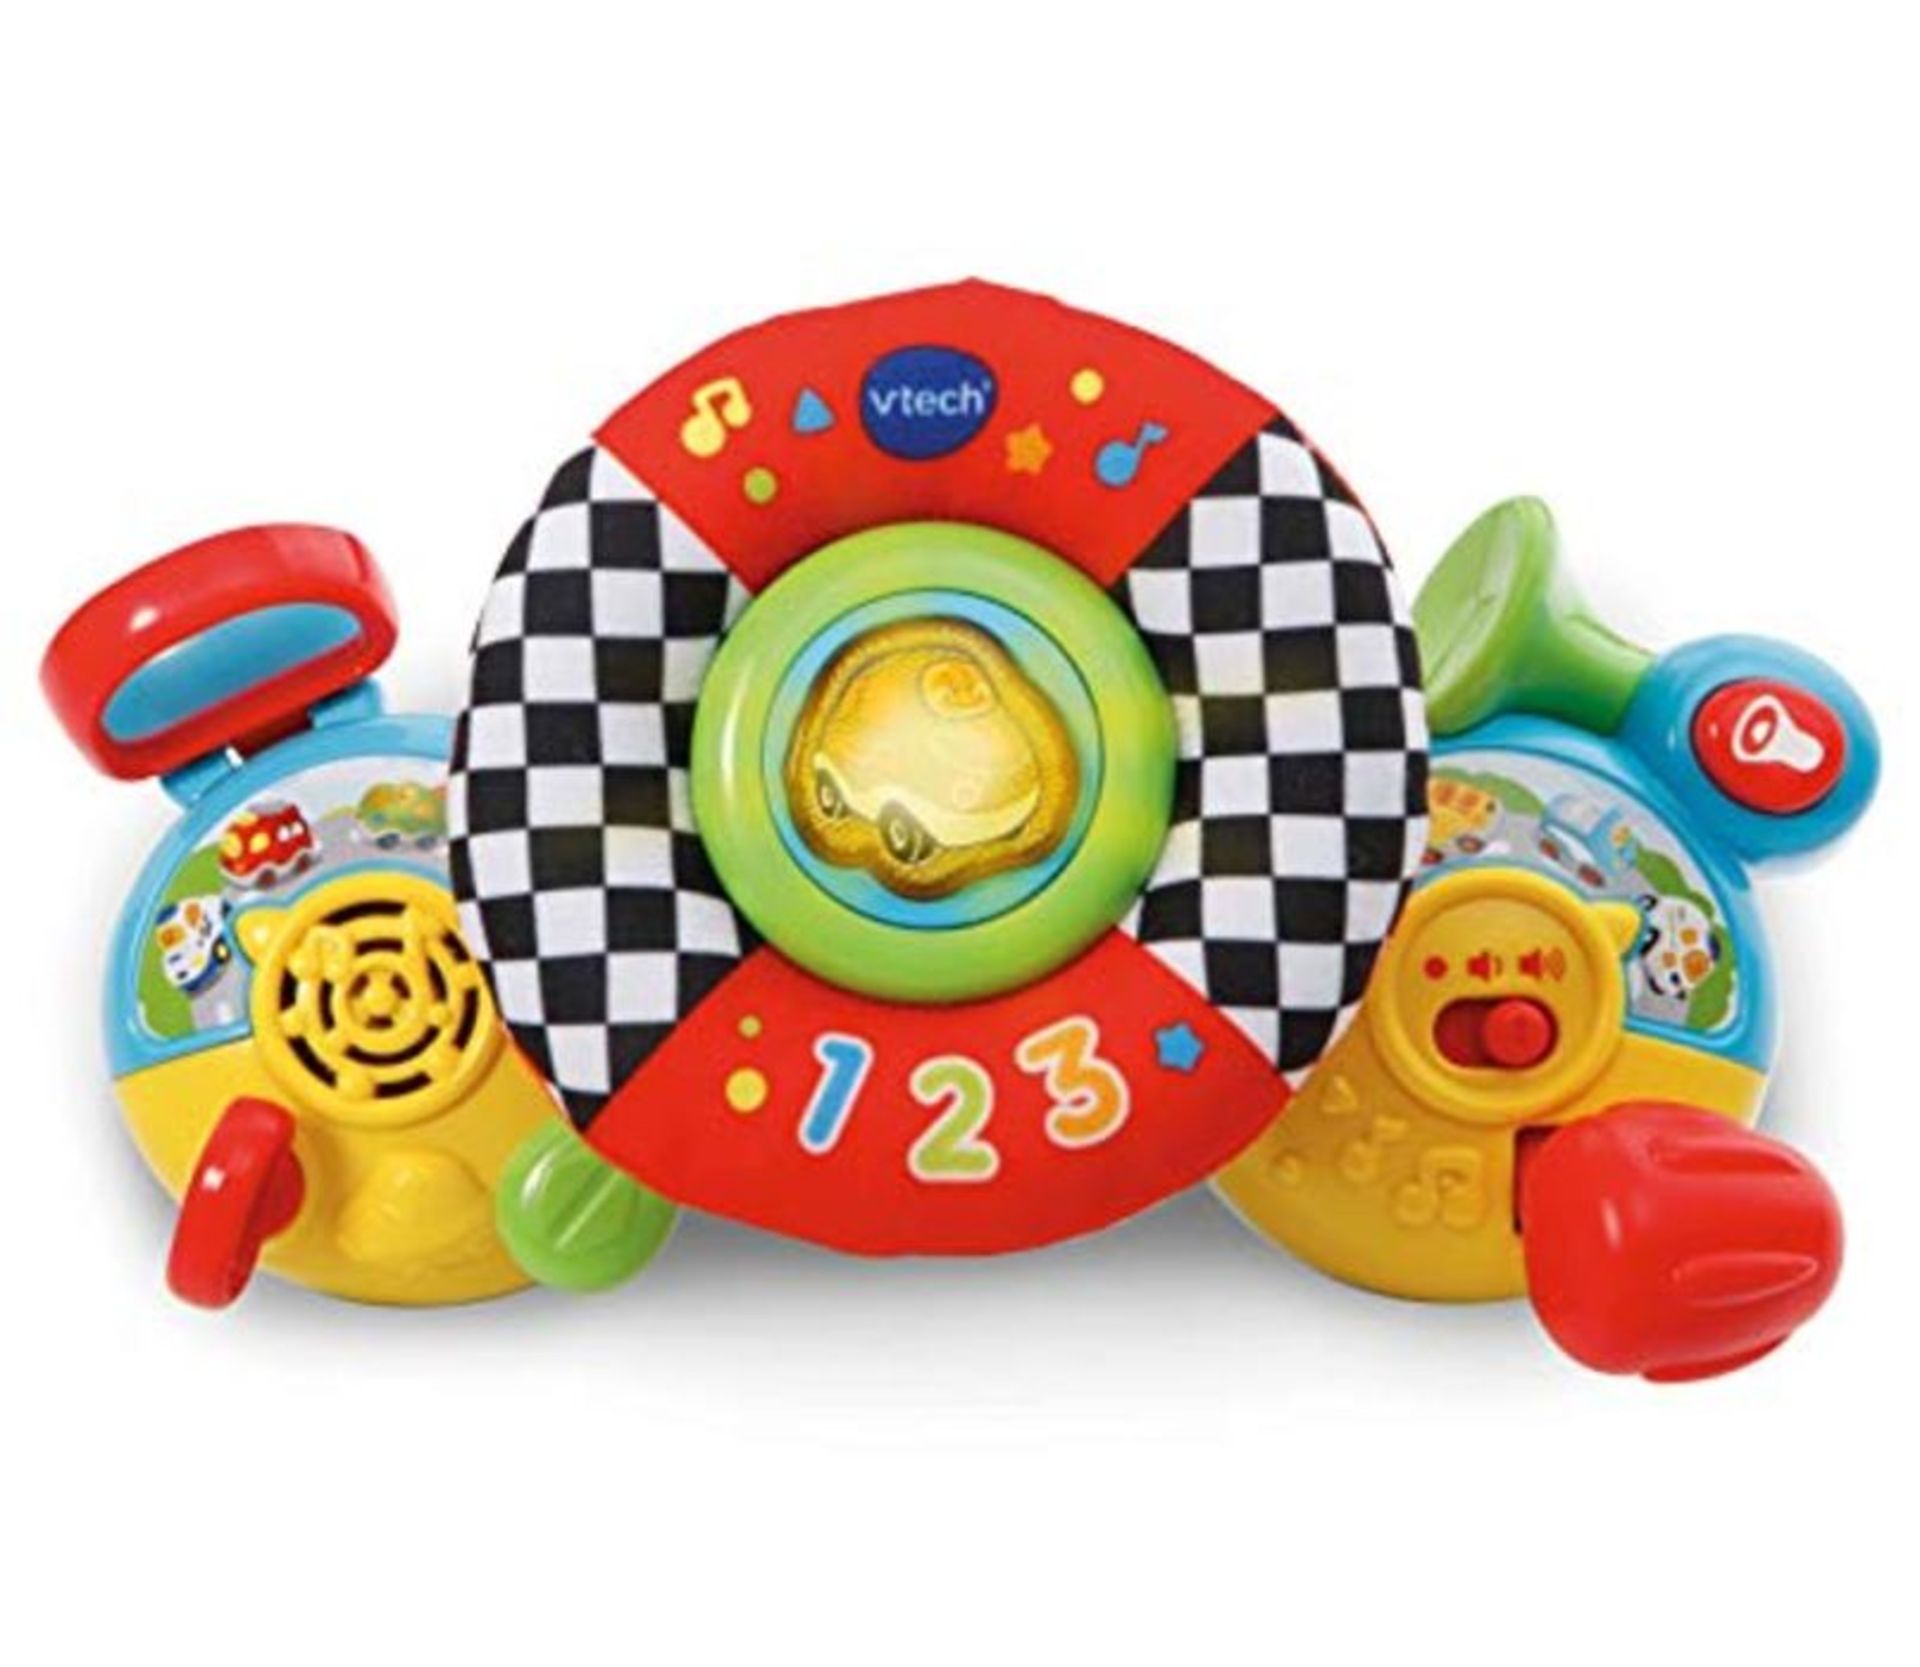 VTech Steering Wheel Tut Tut Drive, Stroller Toy with Holding Strips, Driving Simulato